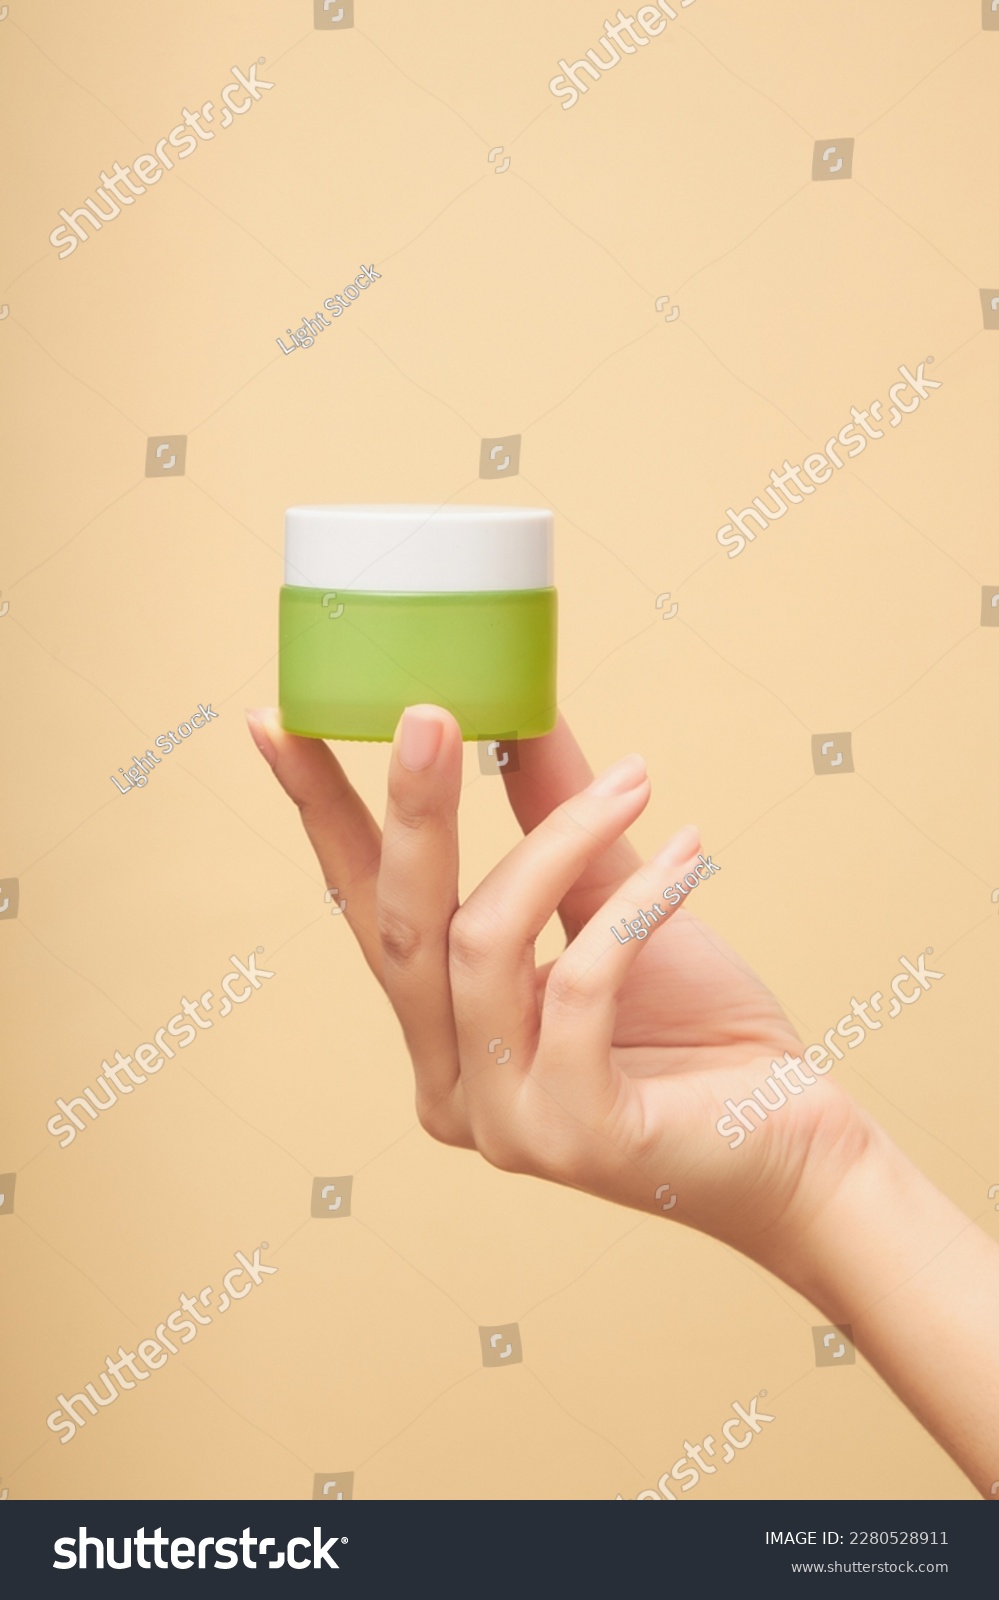 On the palm of the woman's hand is a moisturizing cream made of green glass on a beige background. Unlabeled bottle mockup of anti-aging masks, exfoliating cosmetics. Skin care concept #2280528911